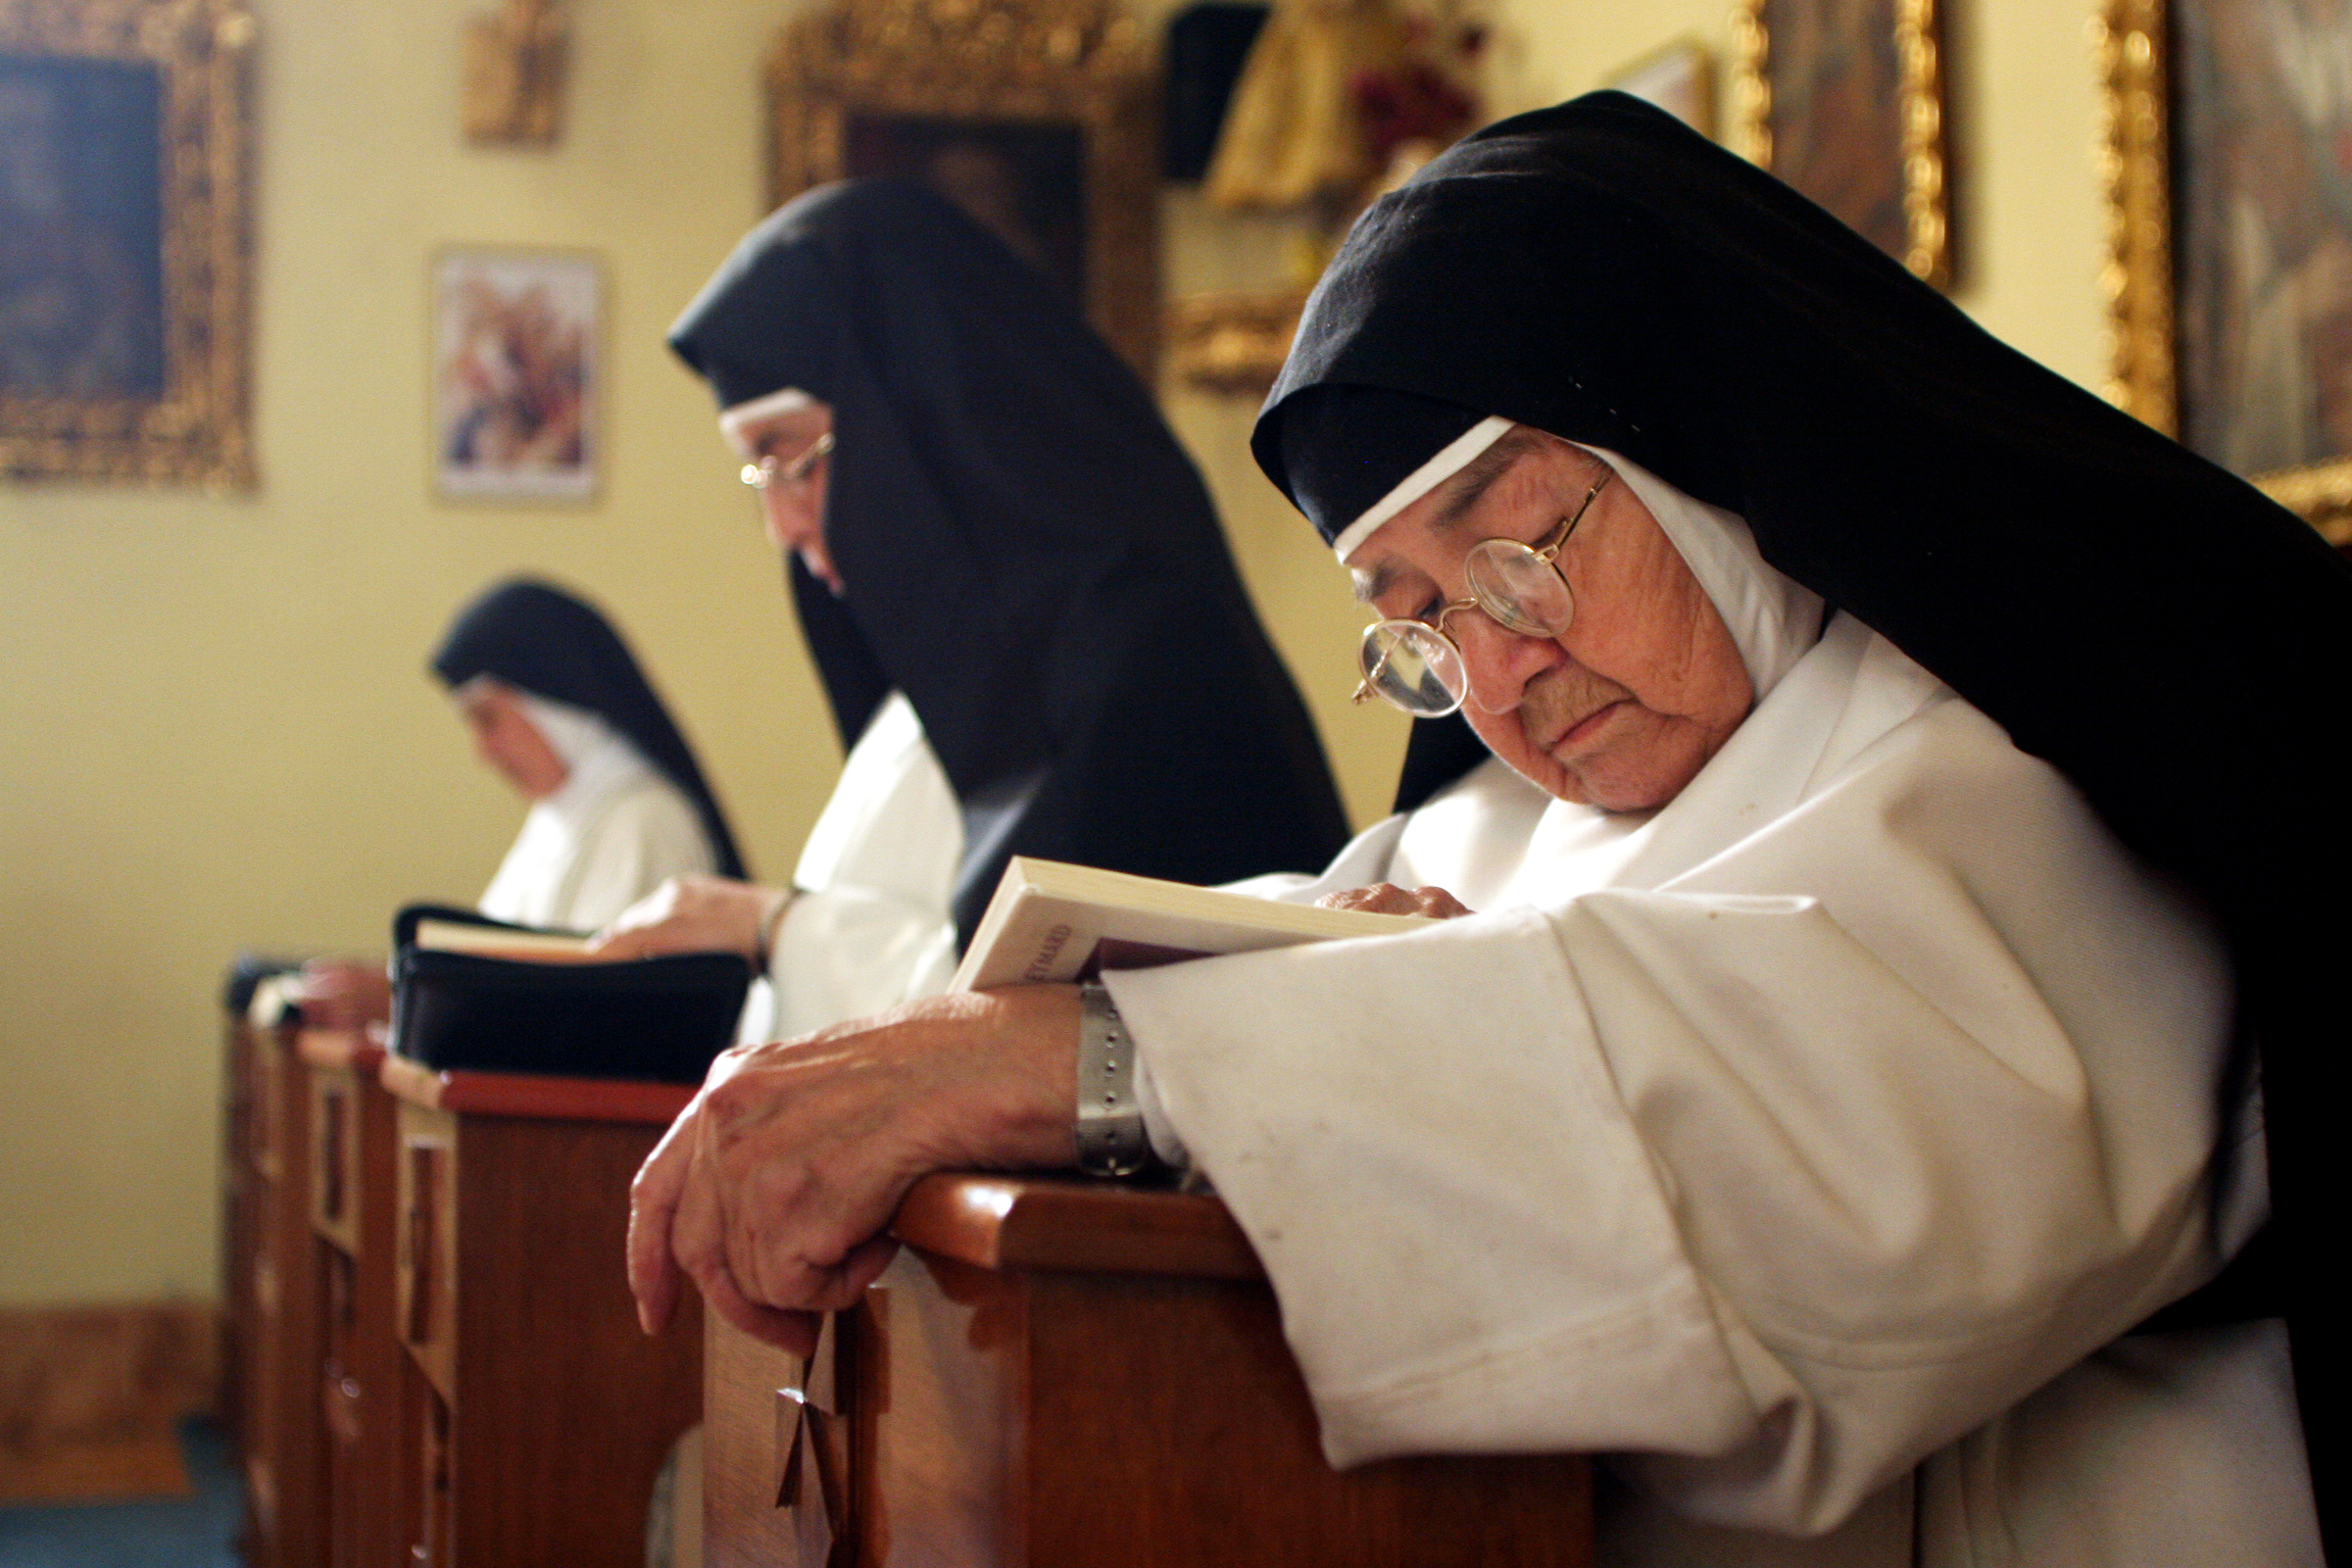  Sister Consuelo de Jesus concentrates on her Bible study, or Lexio Divino, during silent prayer in Santa Catalina Monastery's chapel. The nuns gather five times a day for prayer, the methods of which vary from singing, to chanting, to reciting the r